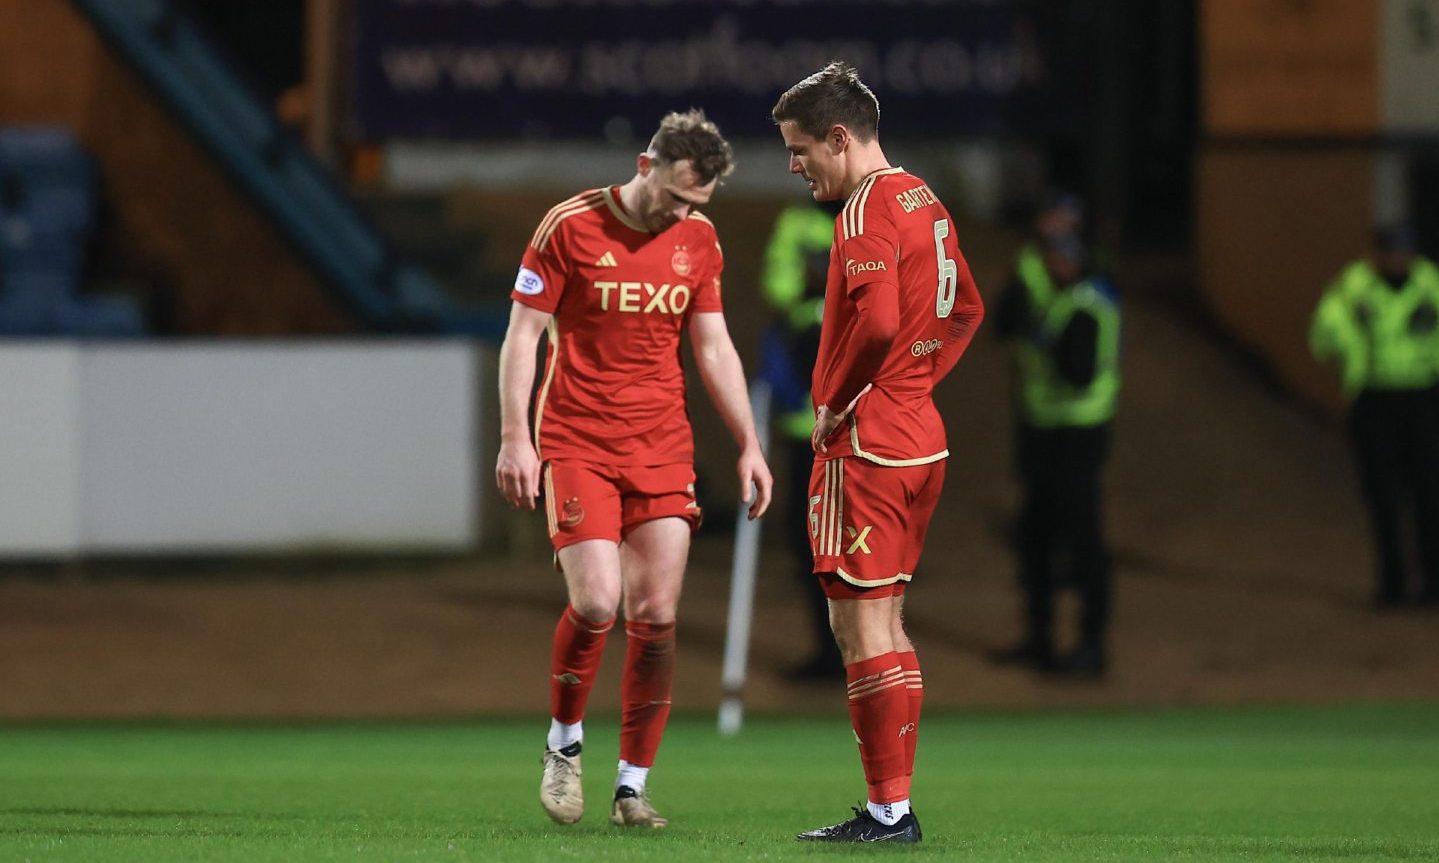 Stefan Gartenmann and Nicky Devlin of Aberdeen look dejected at the end of the 1-0 loss to Dundee. Image: Shutterstock